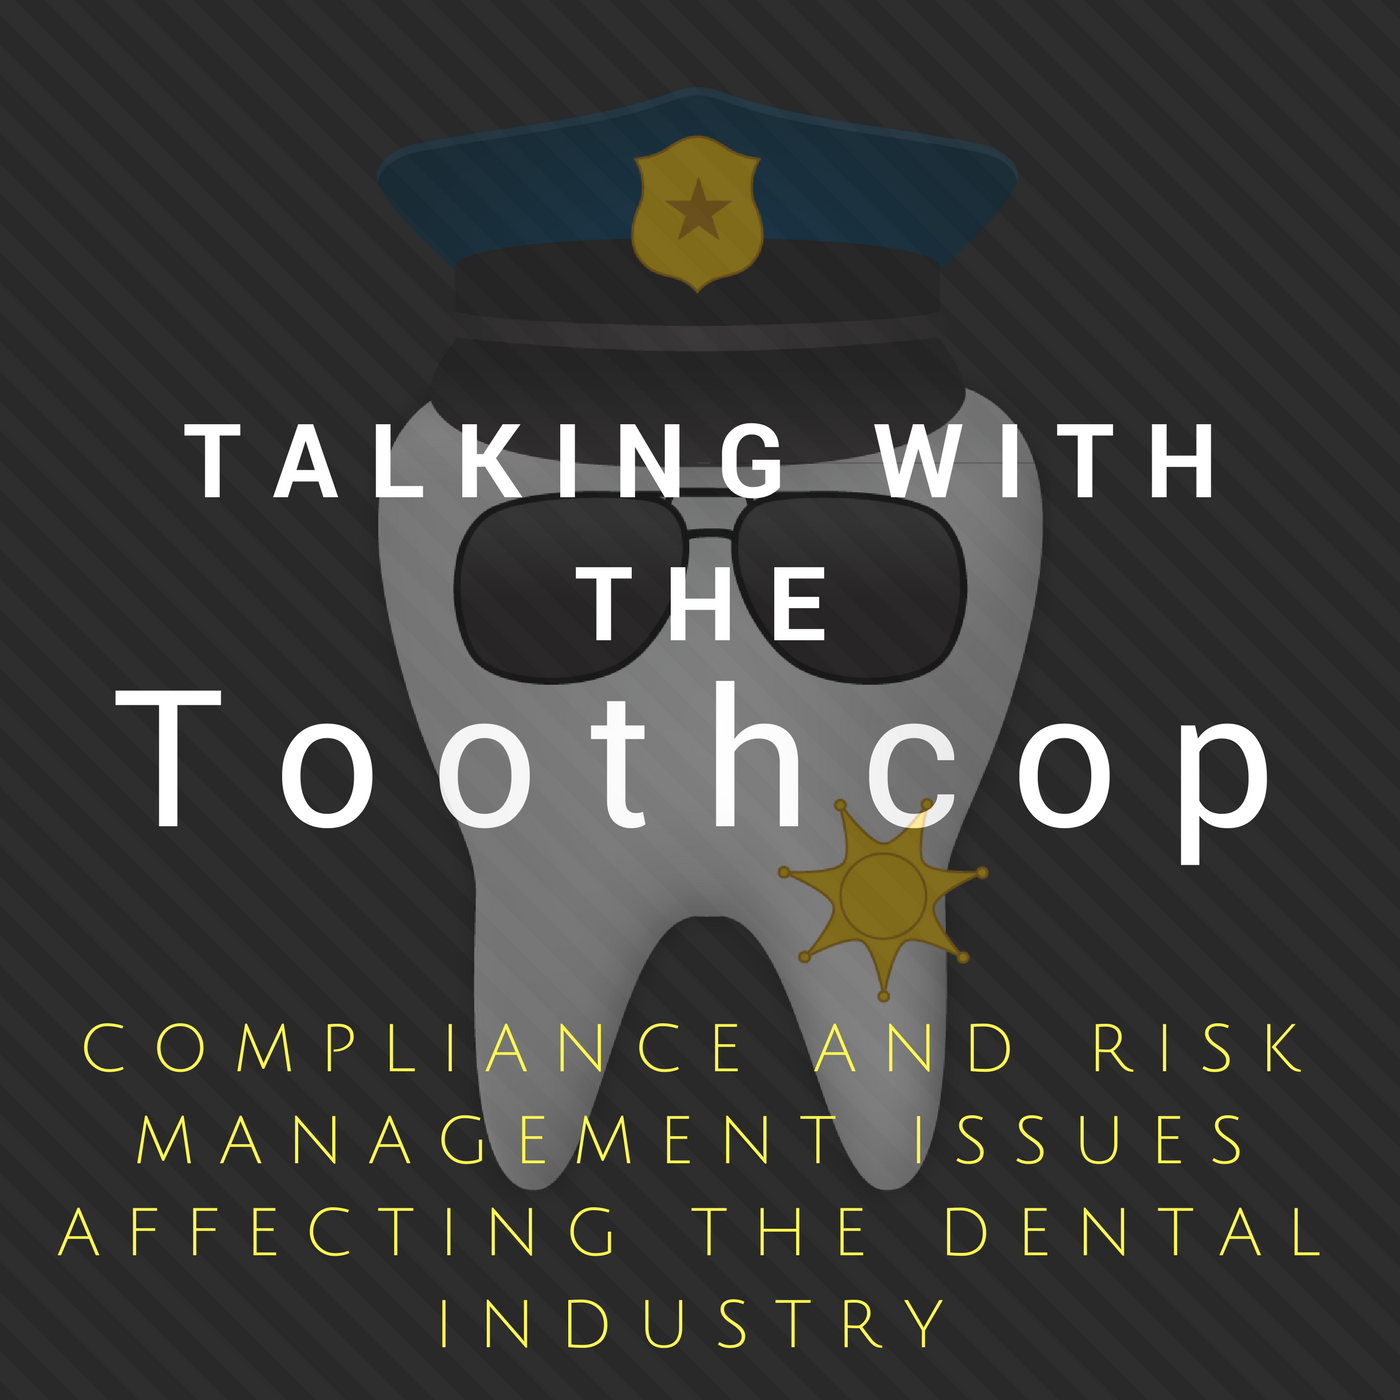 Infection Control In Dentistry: Tools to Keep Yourself and Your Patients Healthy